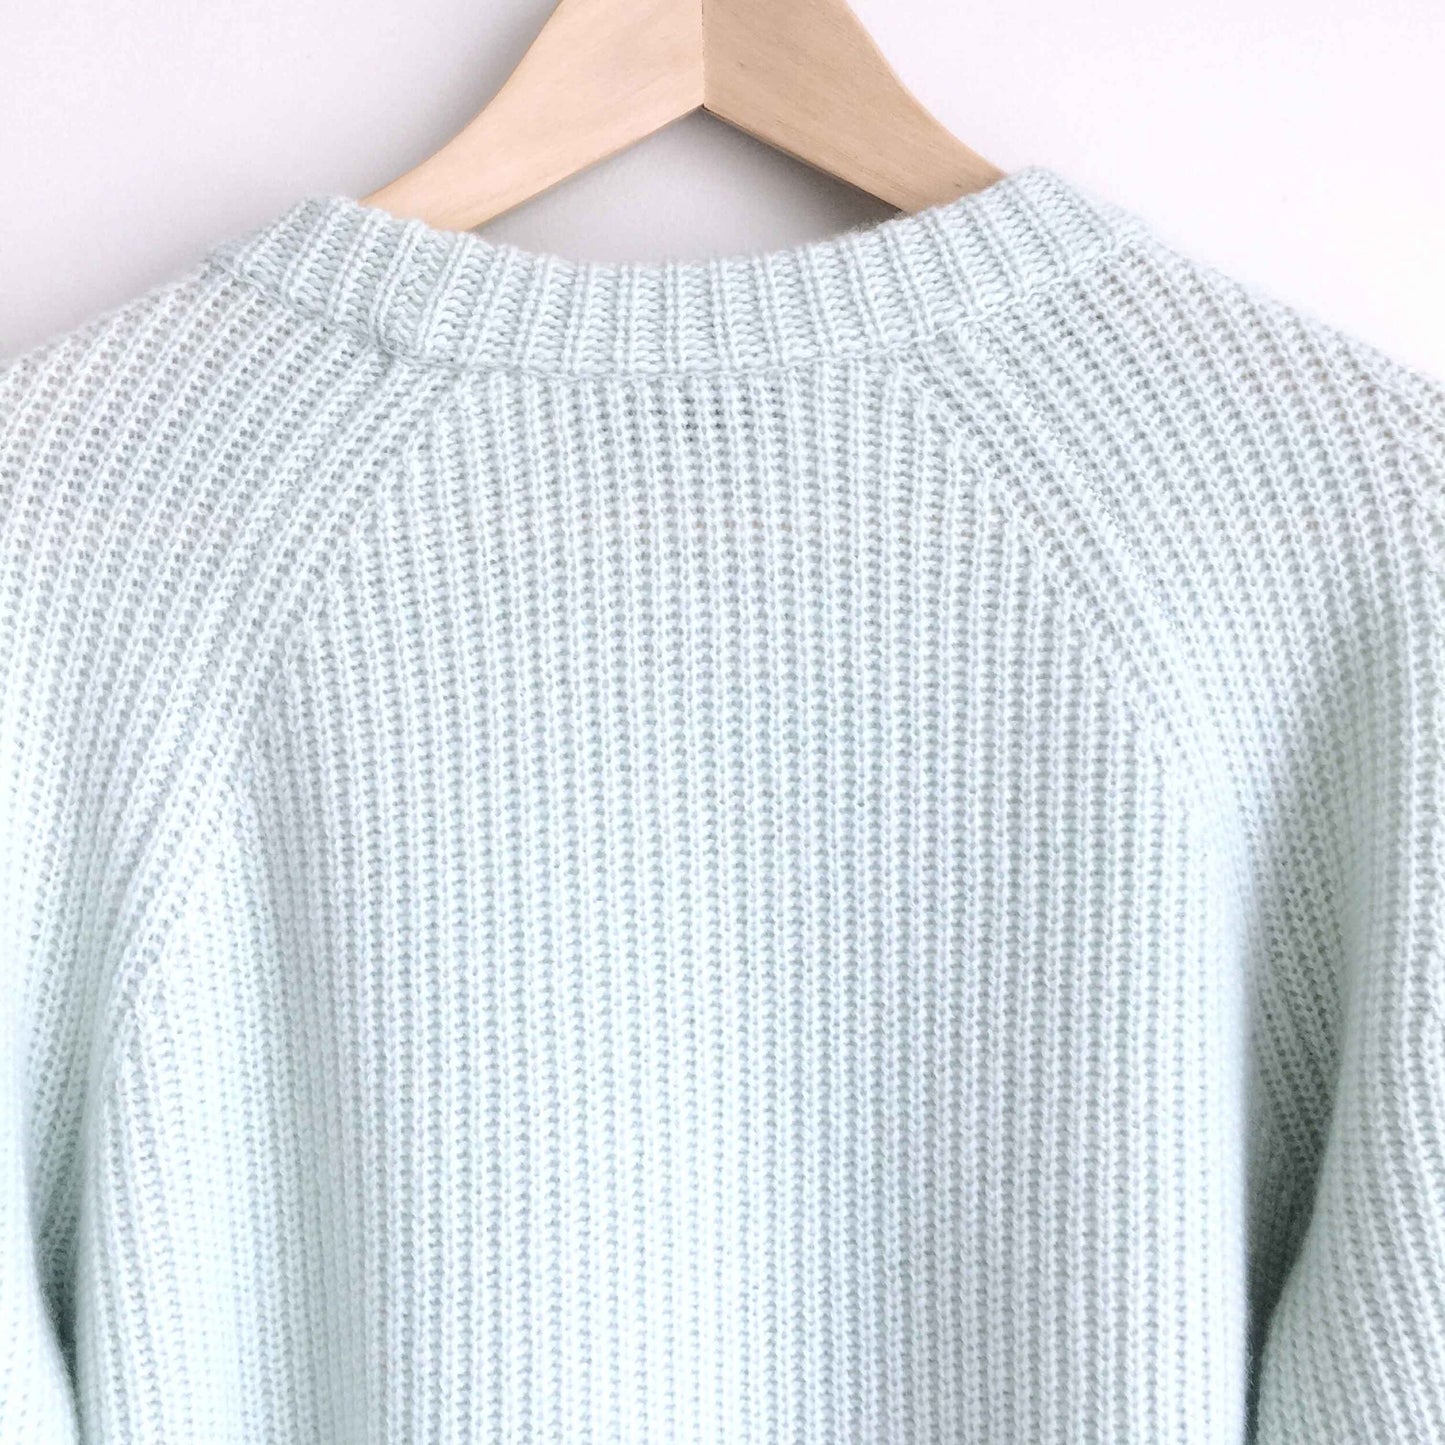 Vince 100% cashmere shaker rib pullover - size Large